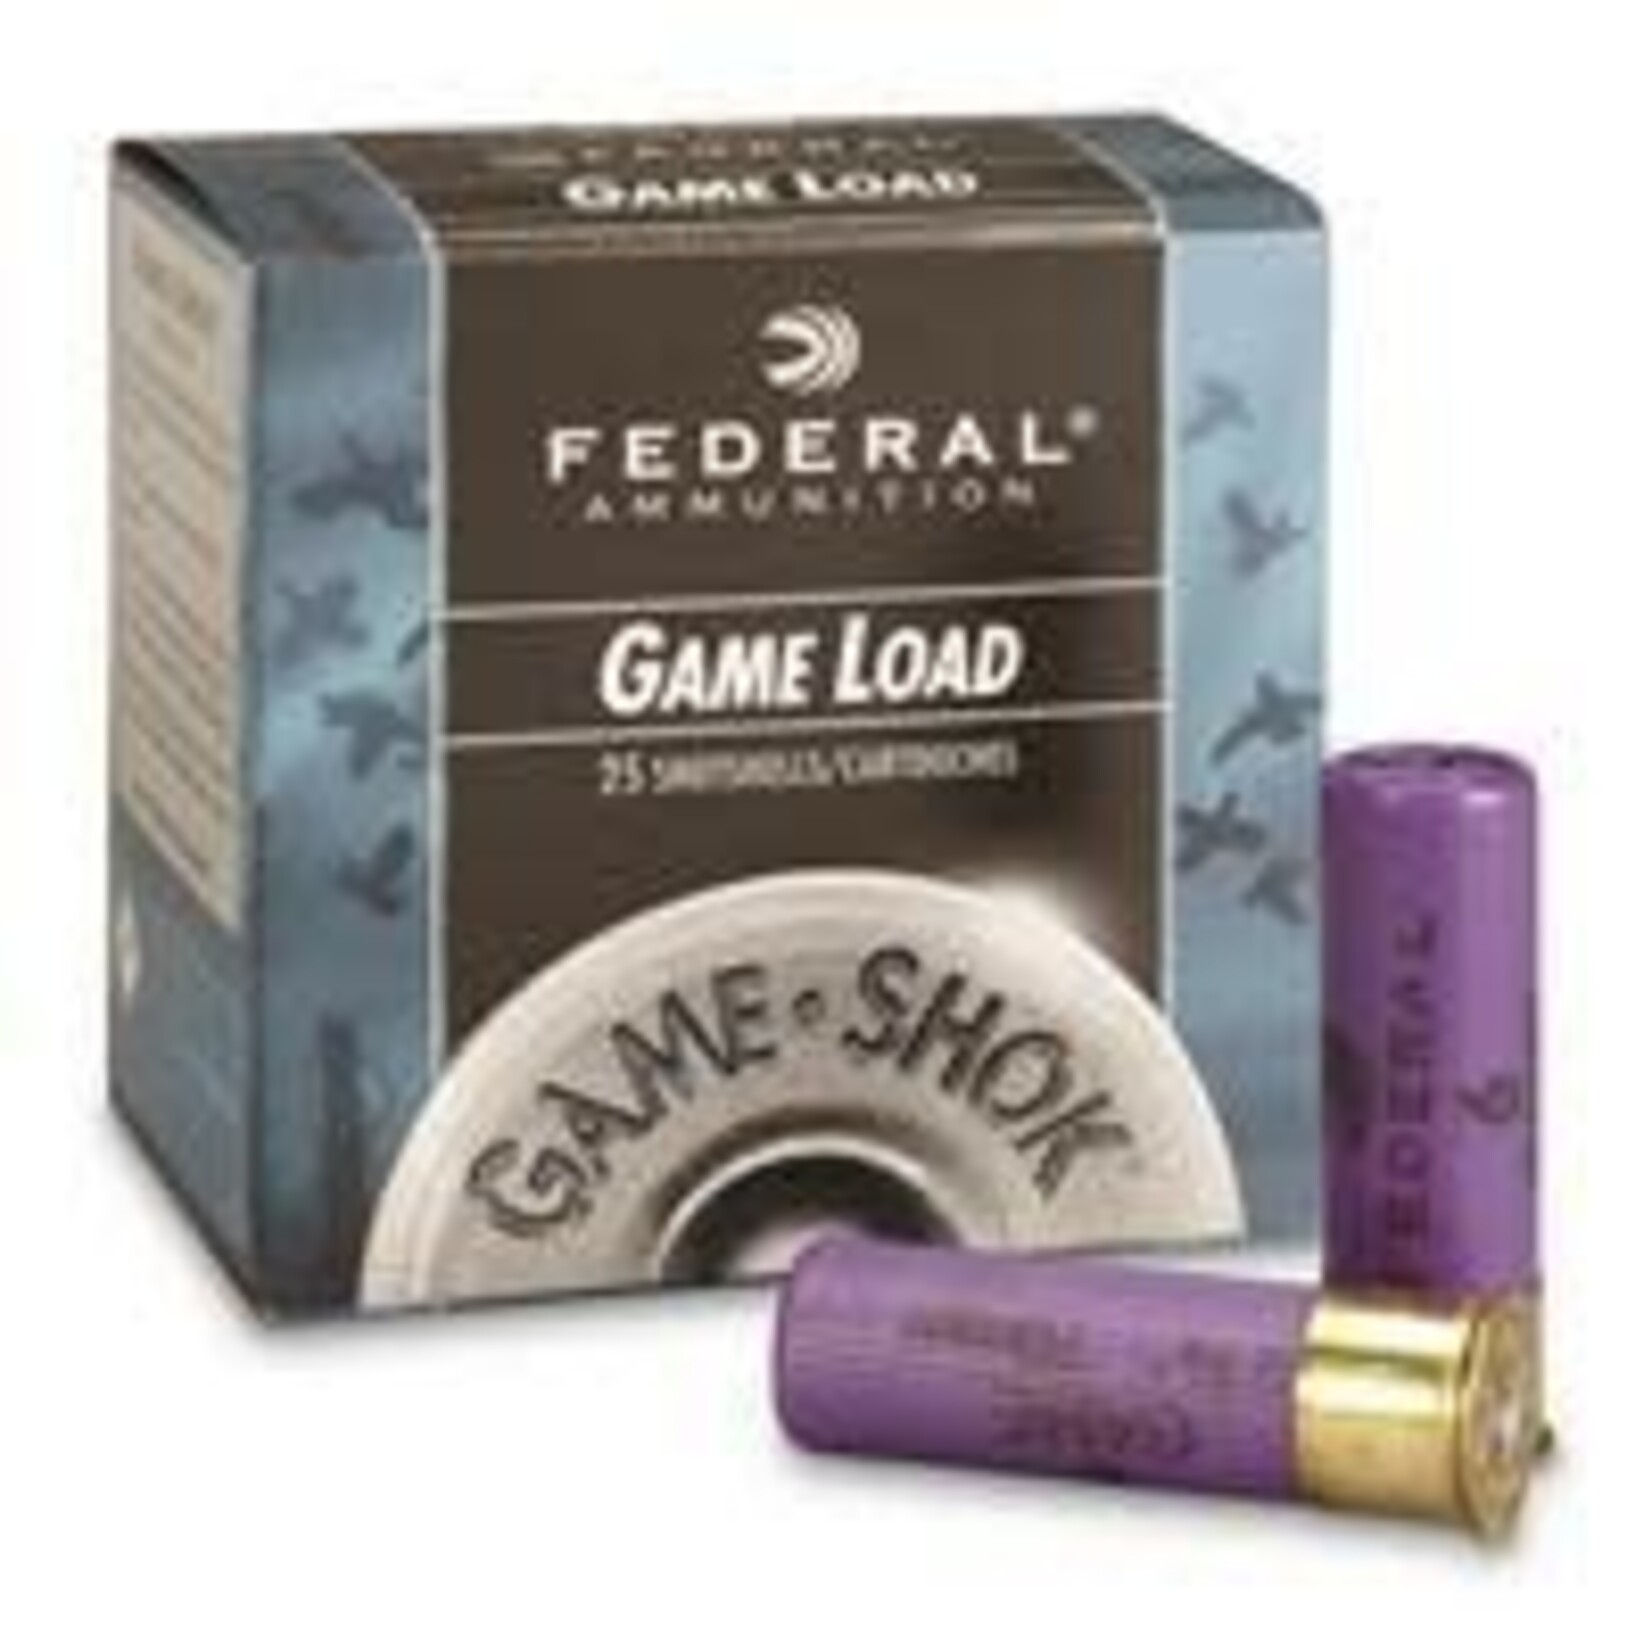 FEDERAL Munitions Federal Game-Load Cal.16 2-3/4" #8 1Oz